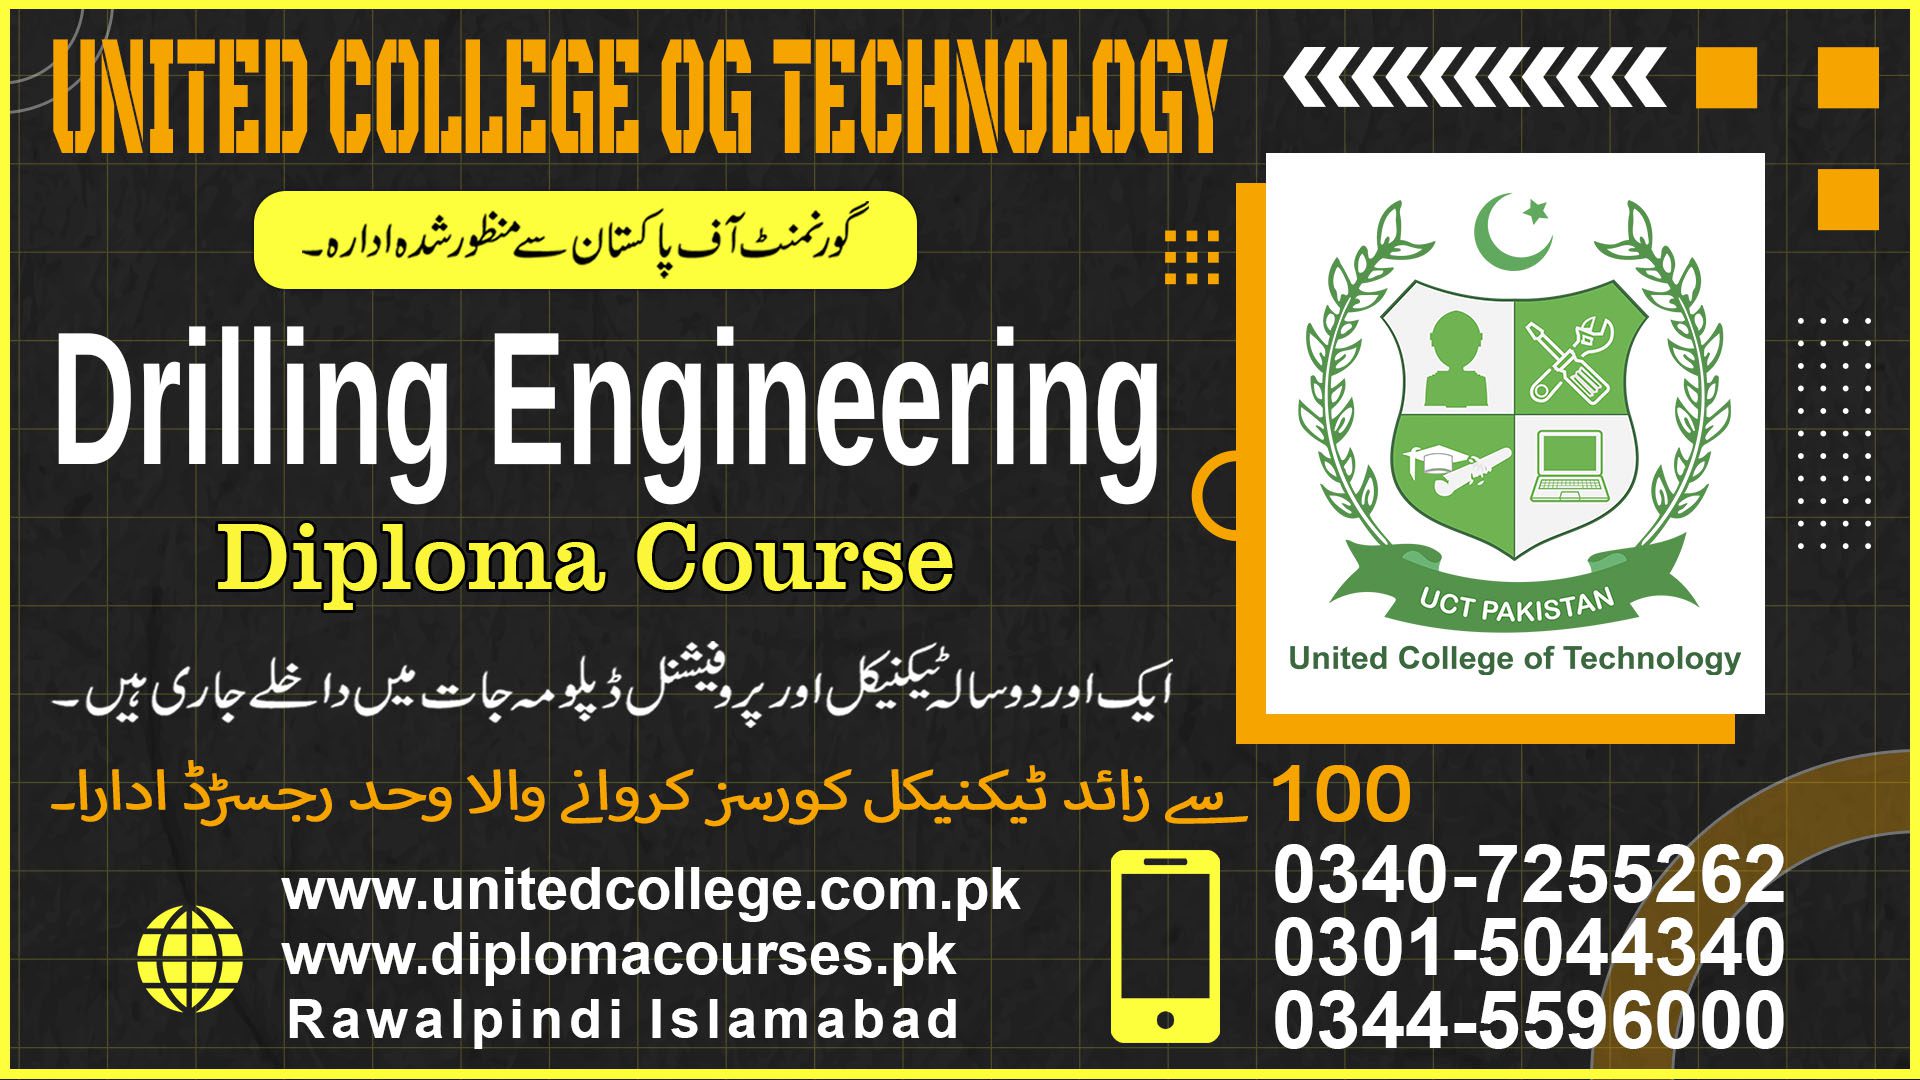 DRILLING ENGINEERING COURSE